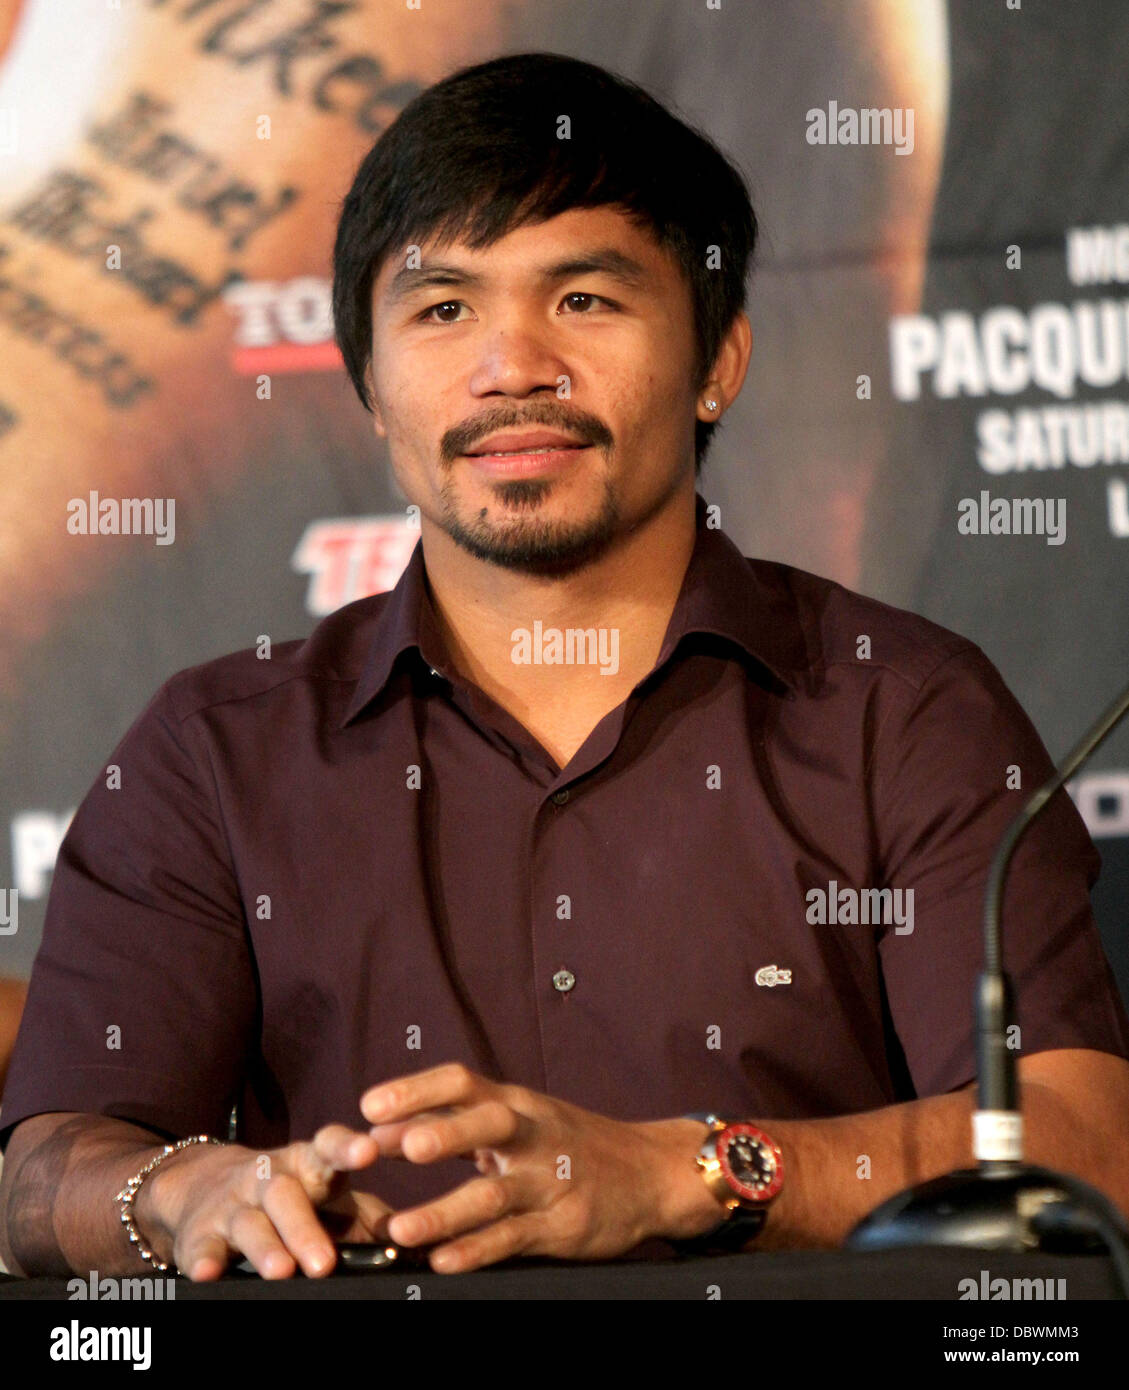 Manny Pacquiao Professional Boxers Manny Pacquiao and Juan Manuel Marquez attend the press conference for their World Welterweight Championship Fight at The Lighthouse at Chelsea Piers New York City, USA